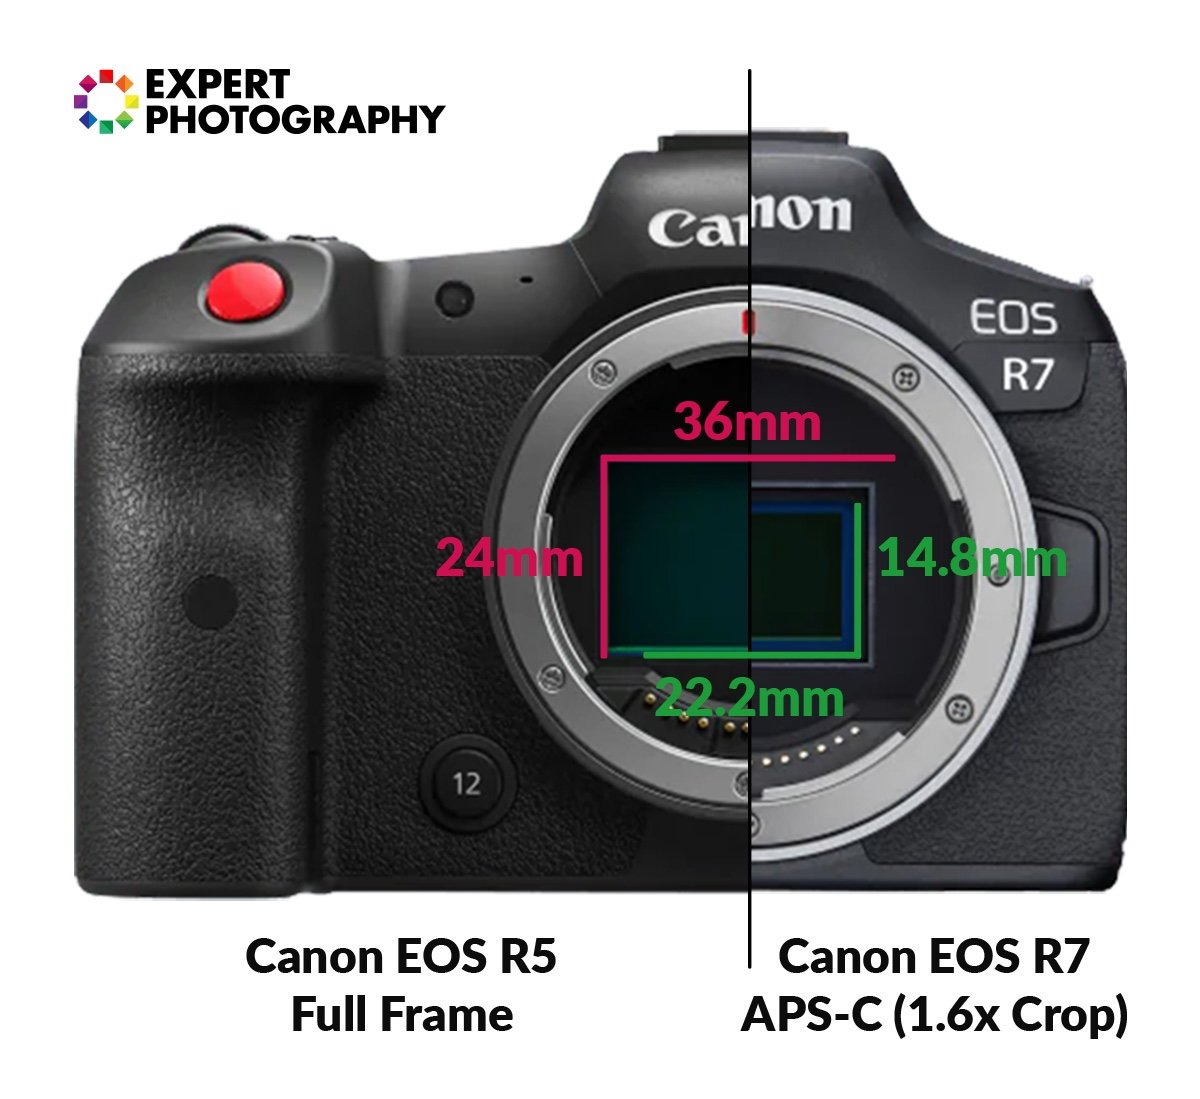 Graphic comparing a full frame vs APS-C sensor on a Canon EOS R5 and a Canon EOS R7